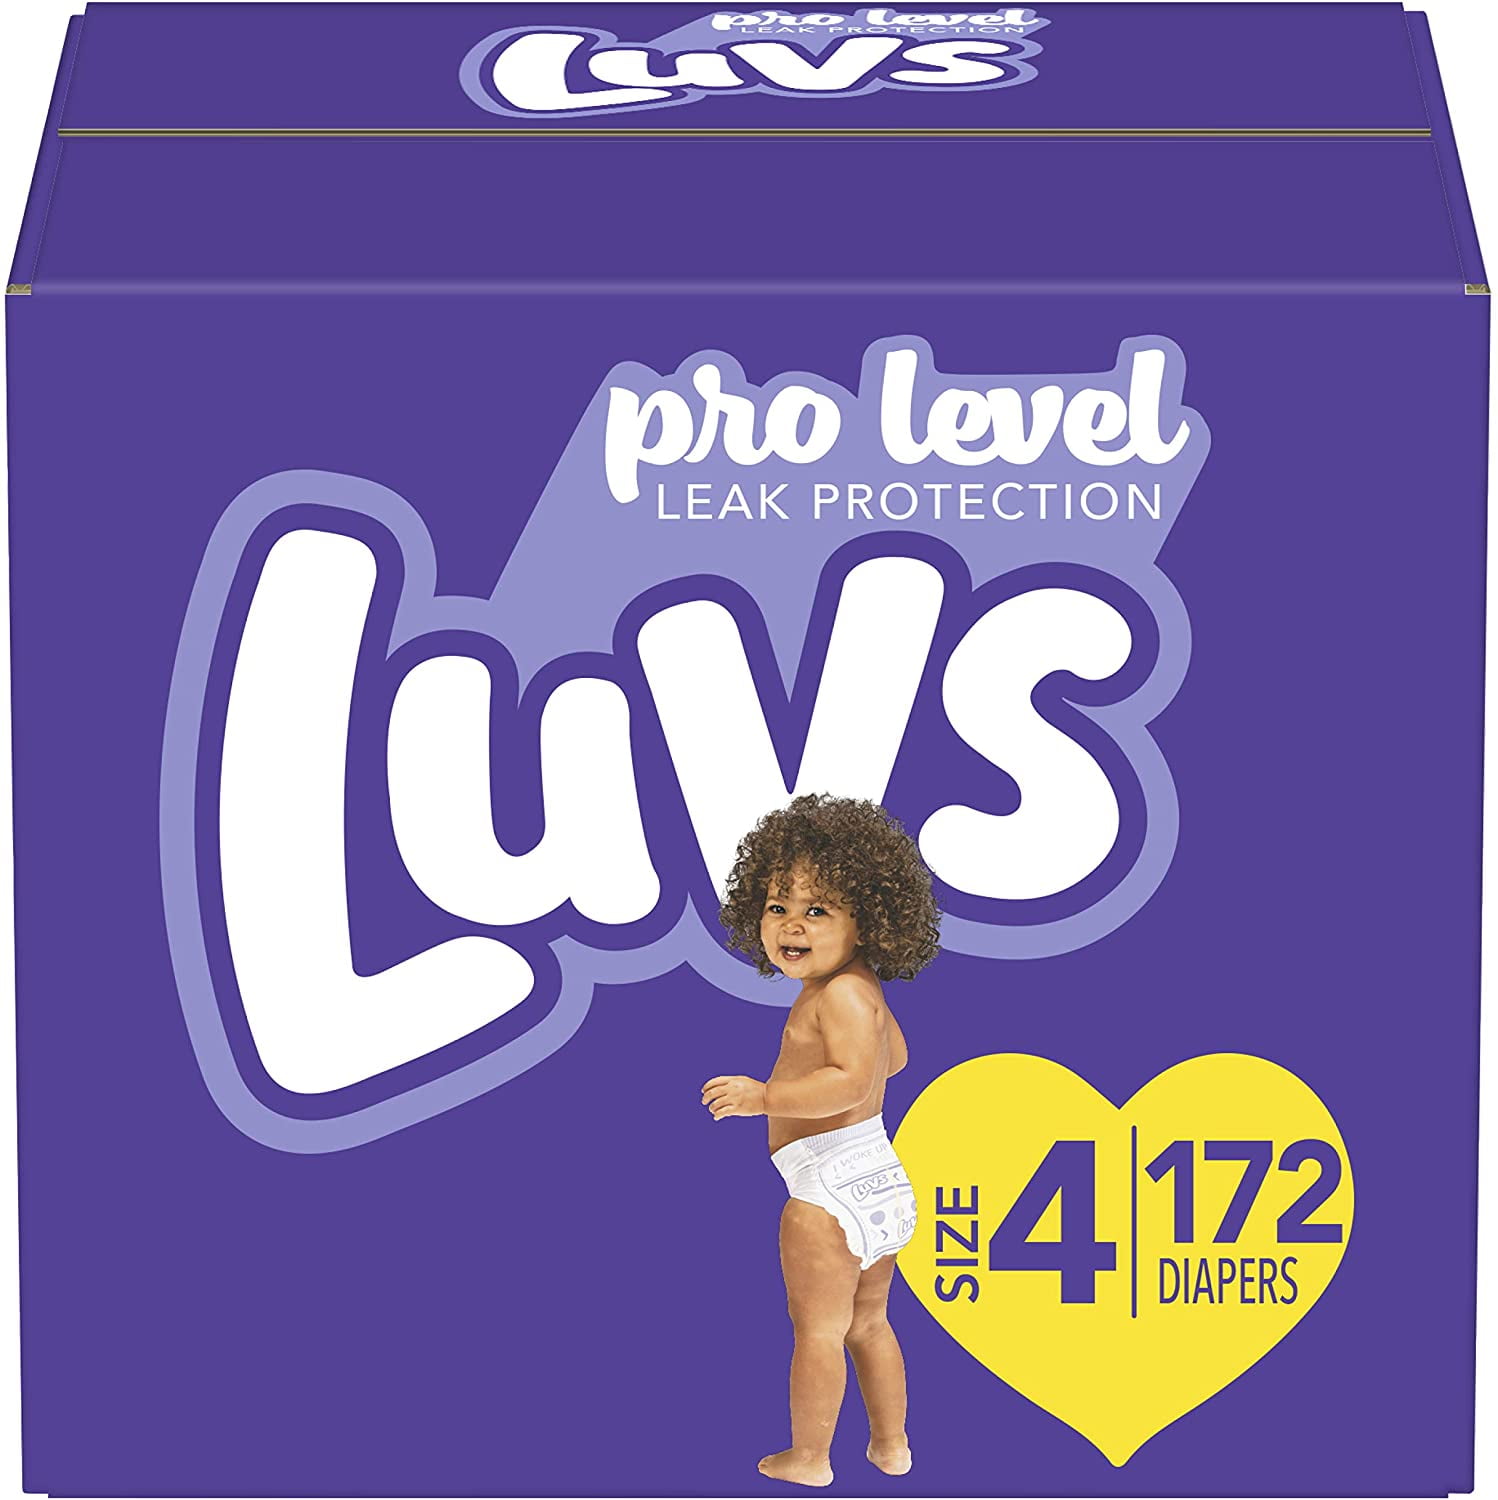 Luvs Ultra Leakguards Disposable Baby Diapers 172 Count ONE MONTH SUPPLY Size 4